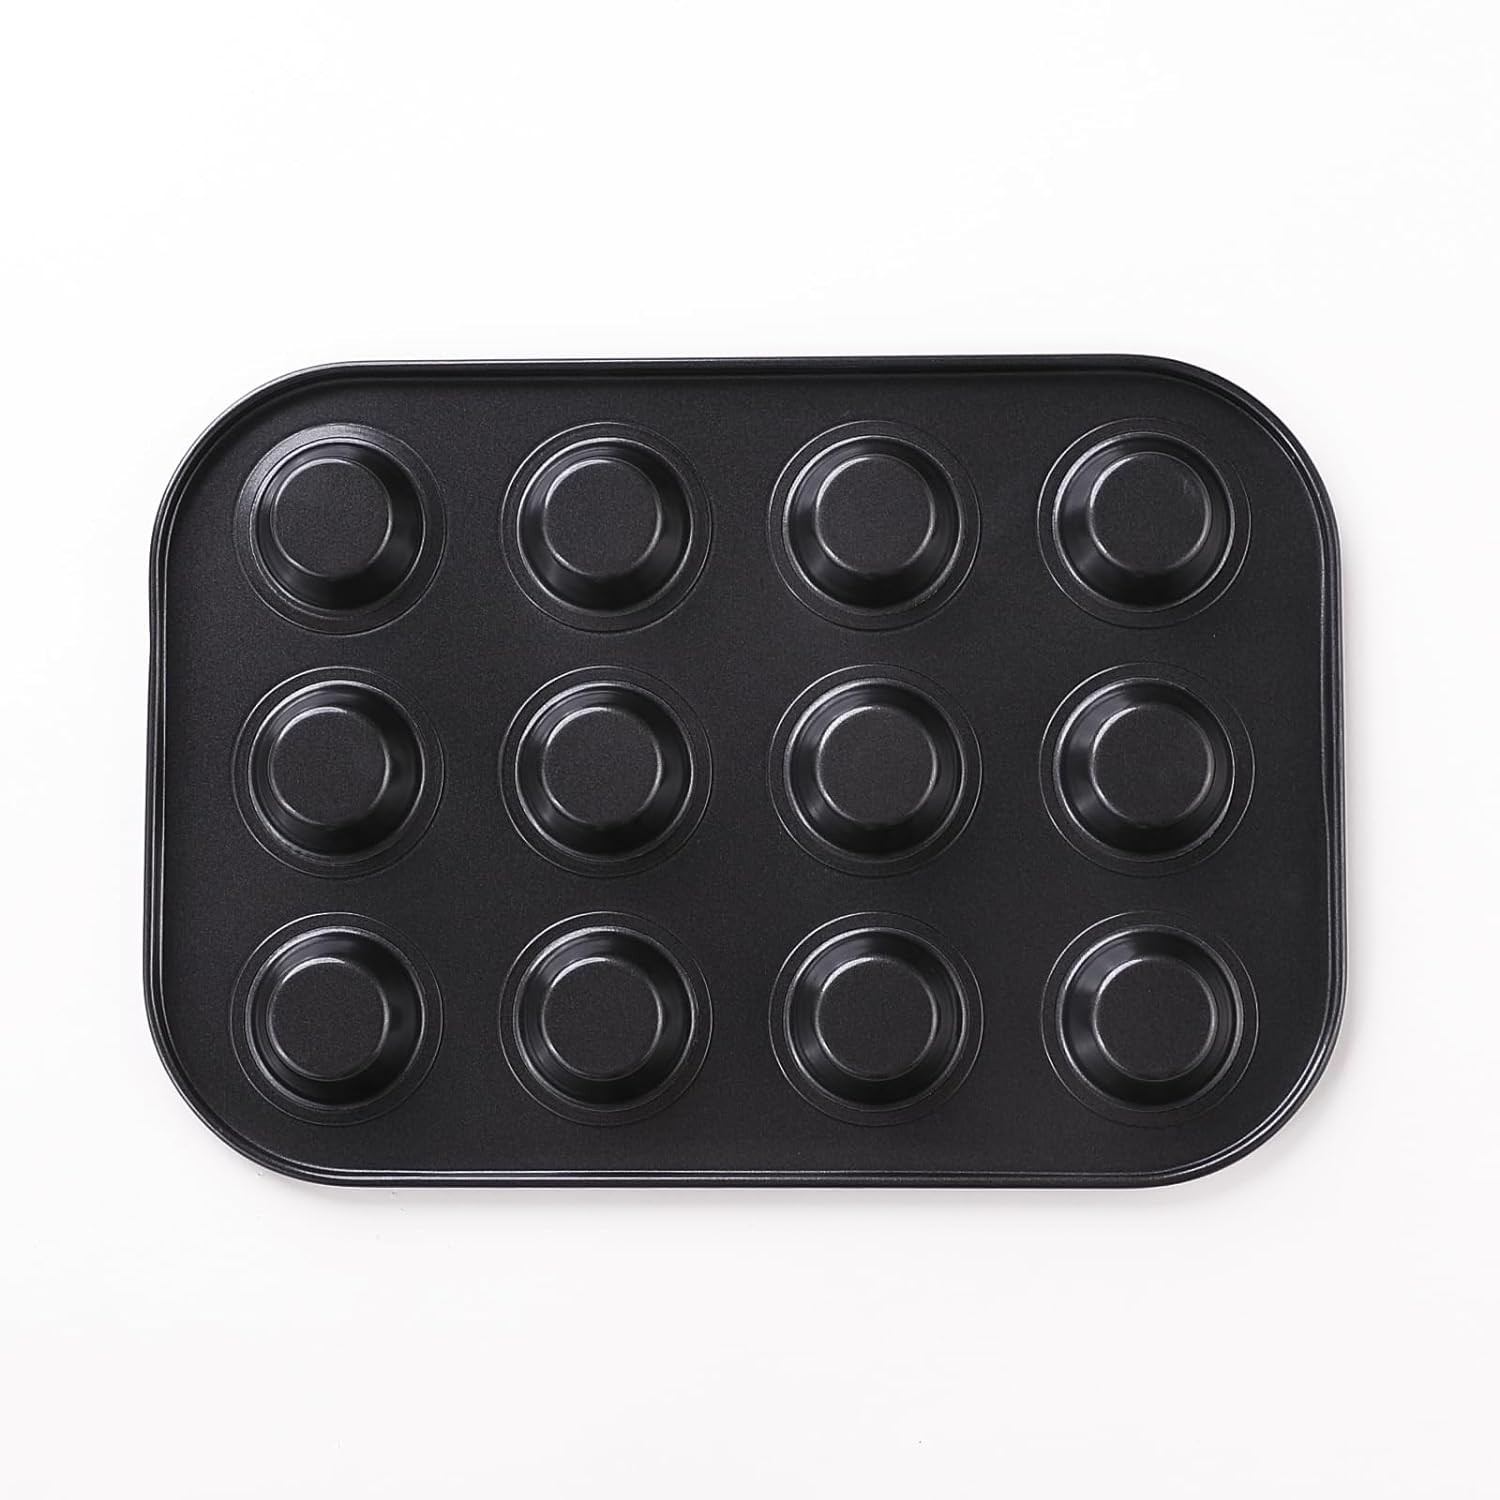 Kuber Industries 12 Slots Non-Stick Cup Cake Tray|Cup Cake Mould for Baking|Idol for Muffin, Small Cake (Black)